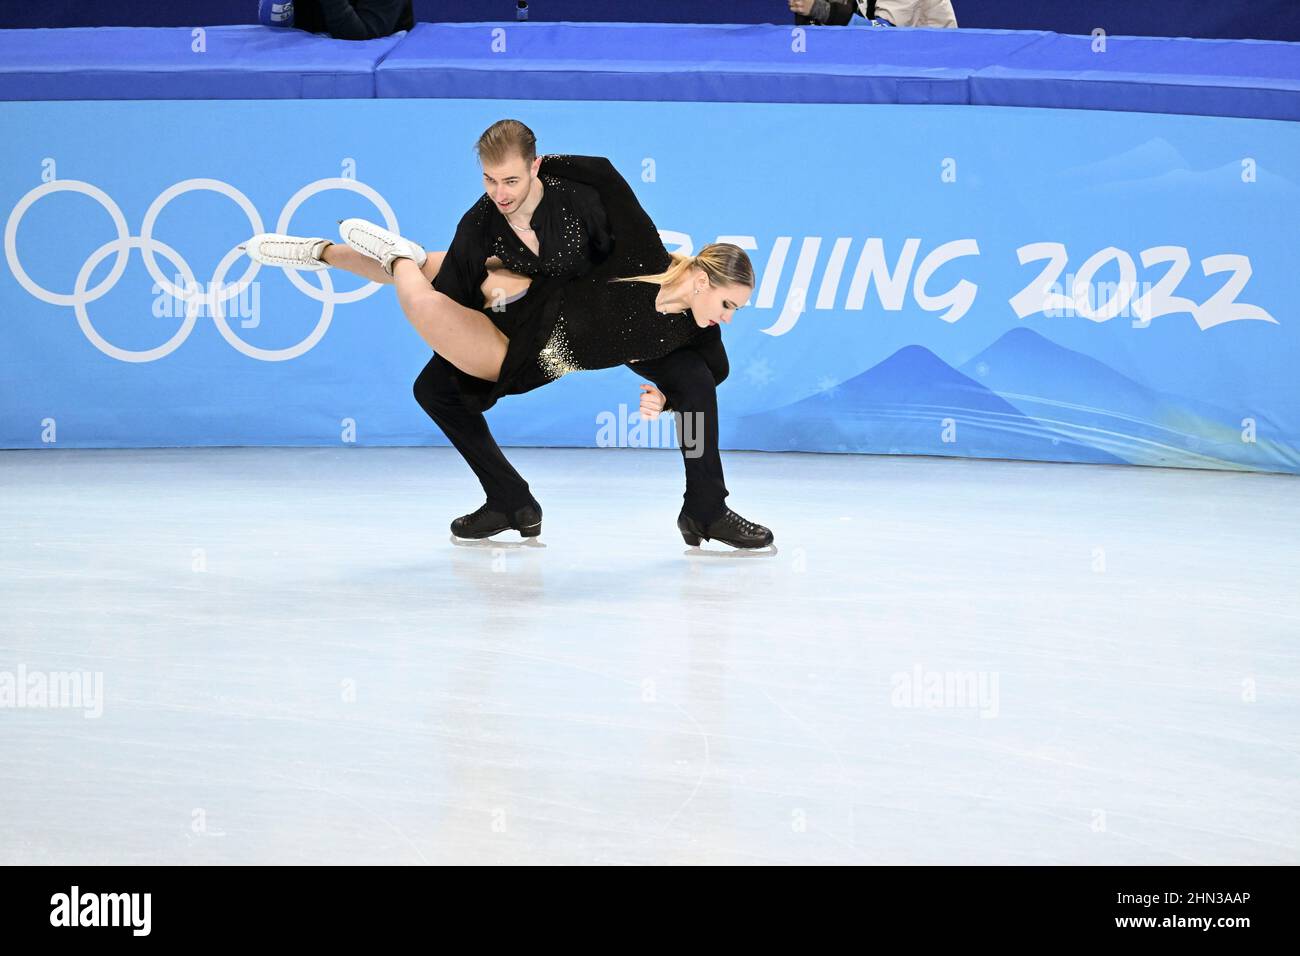 Beijing, China. 14th Feb, 2022. Natalie Taschlerova (front) and Filip Taschler of the Czech Republic perform during the figure skating ice dance free dance match of Beijing 2022 Winter Olympics at Capital Indoor Stadium in Beijing, capital of China, Feb. 14, 2022. Credit: Wang Jianwei/Xinhua/Alamy Live News Stock Photo